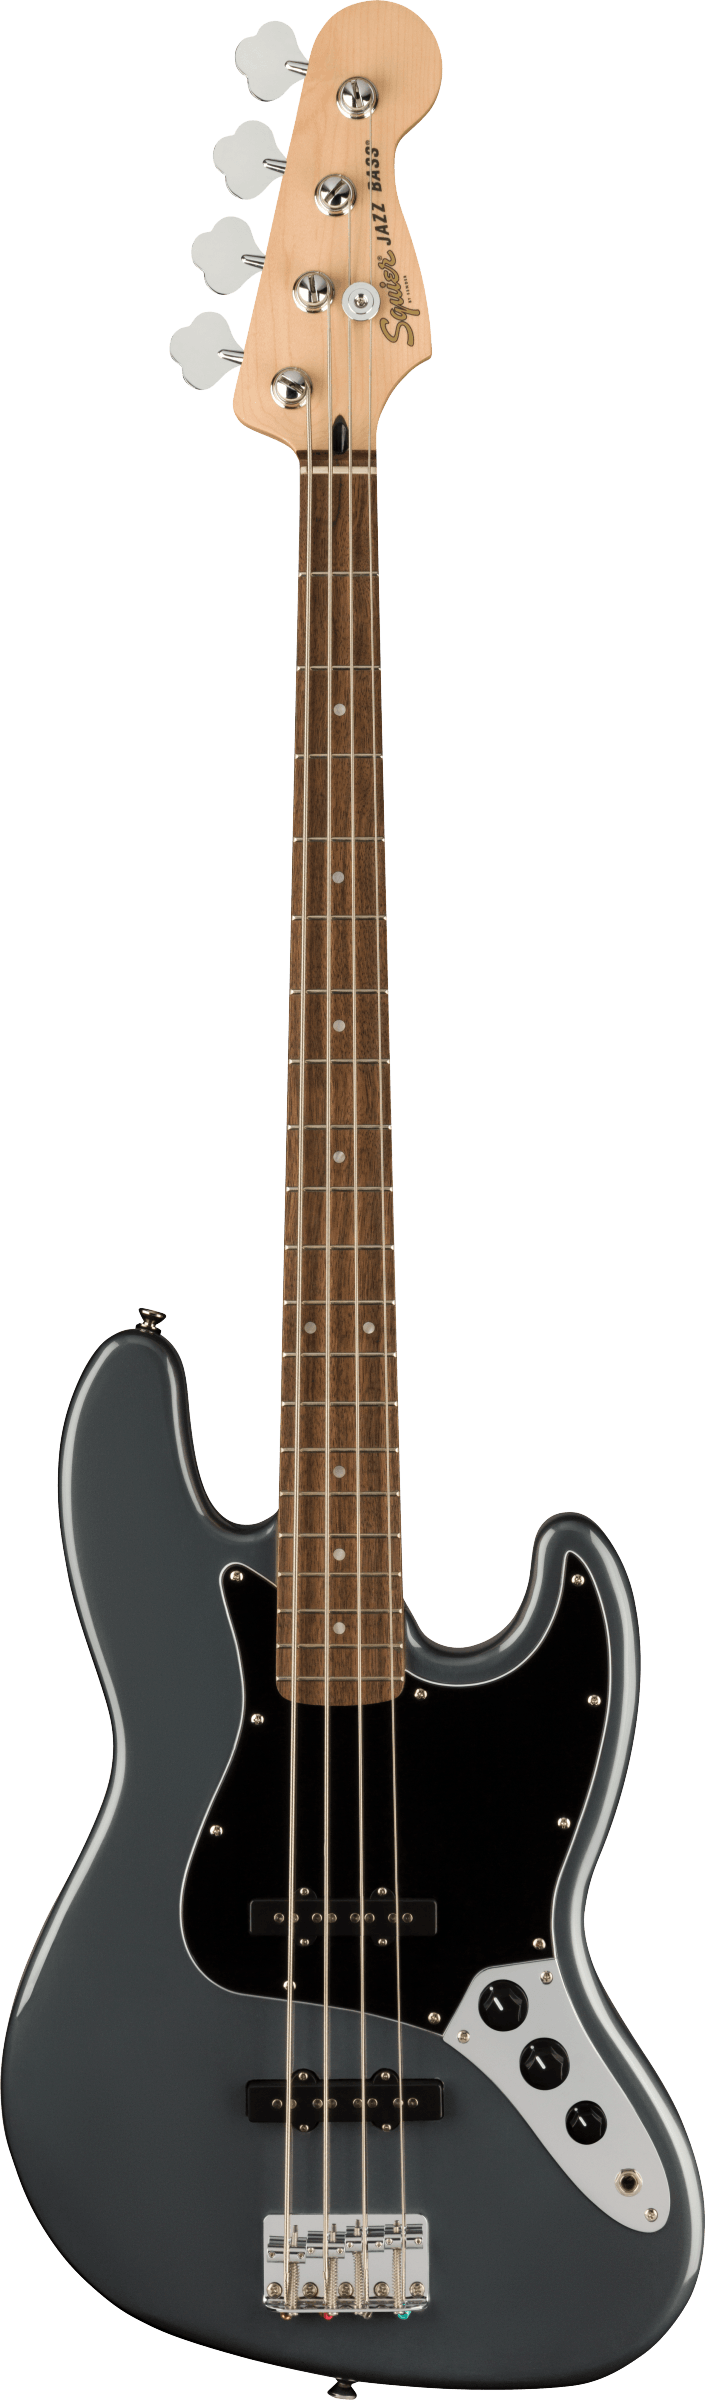 Squier Affinity Series Jazz Bass - Charcoal Frost Metallic - Joondalup Music Centre